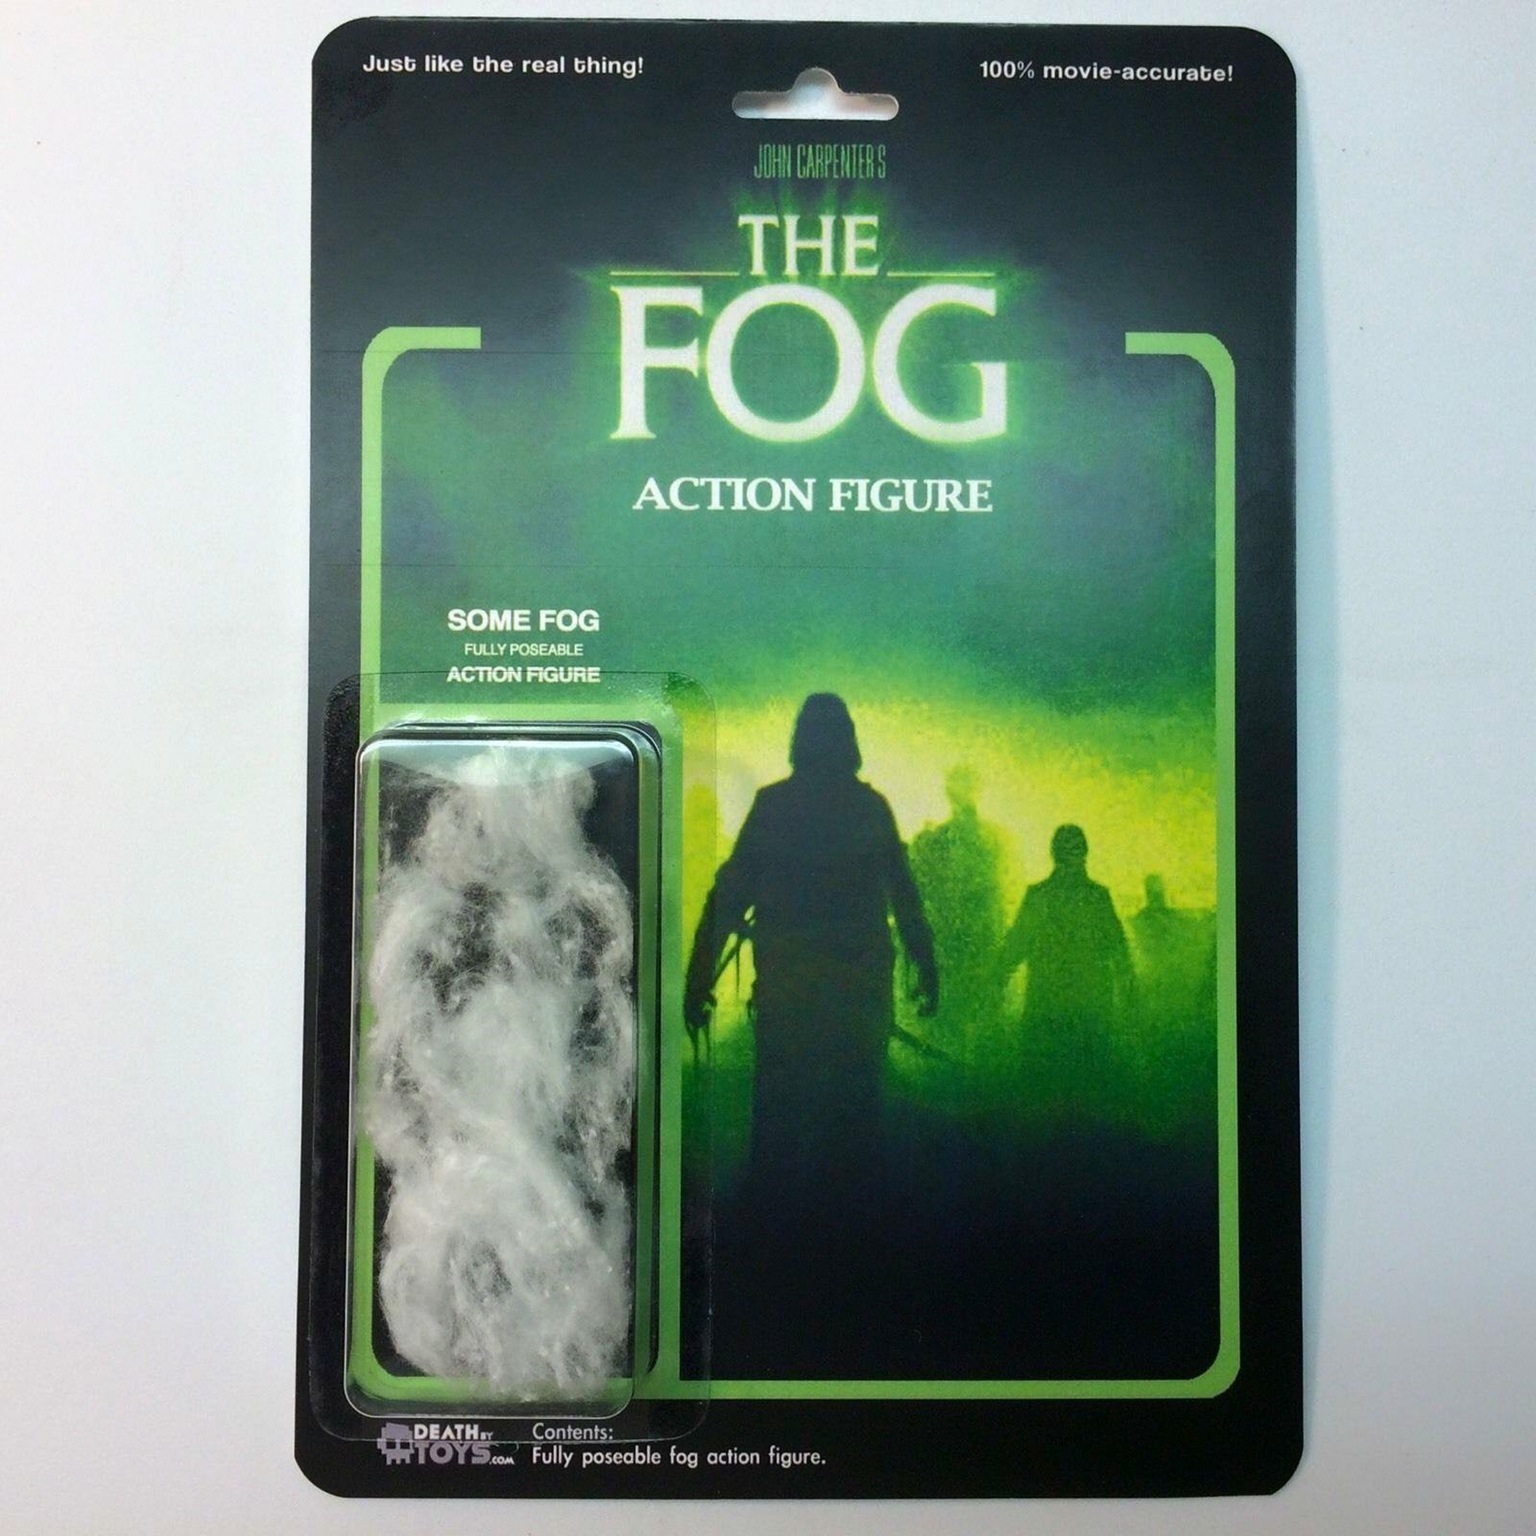 fog action figure - Just the real thingt 100% movieaccurate! Jnen The Foc Action Figure Some Fog Action Figure Death. Toys Como Huly portable log action figure.